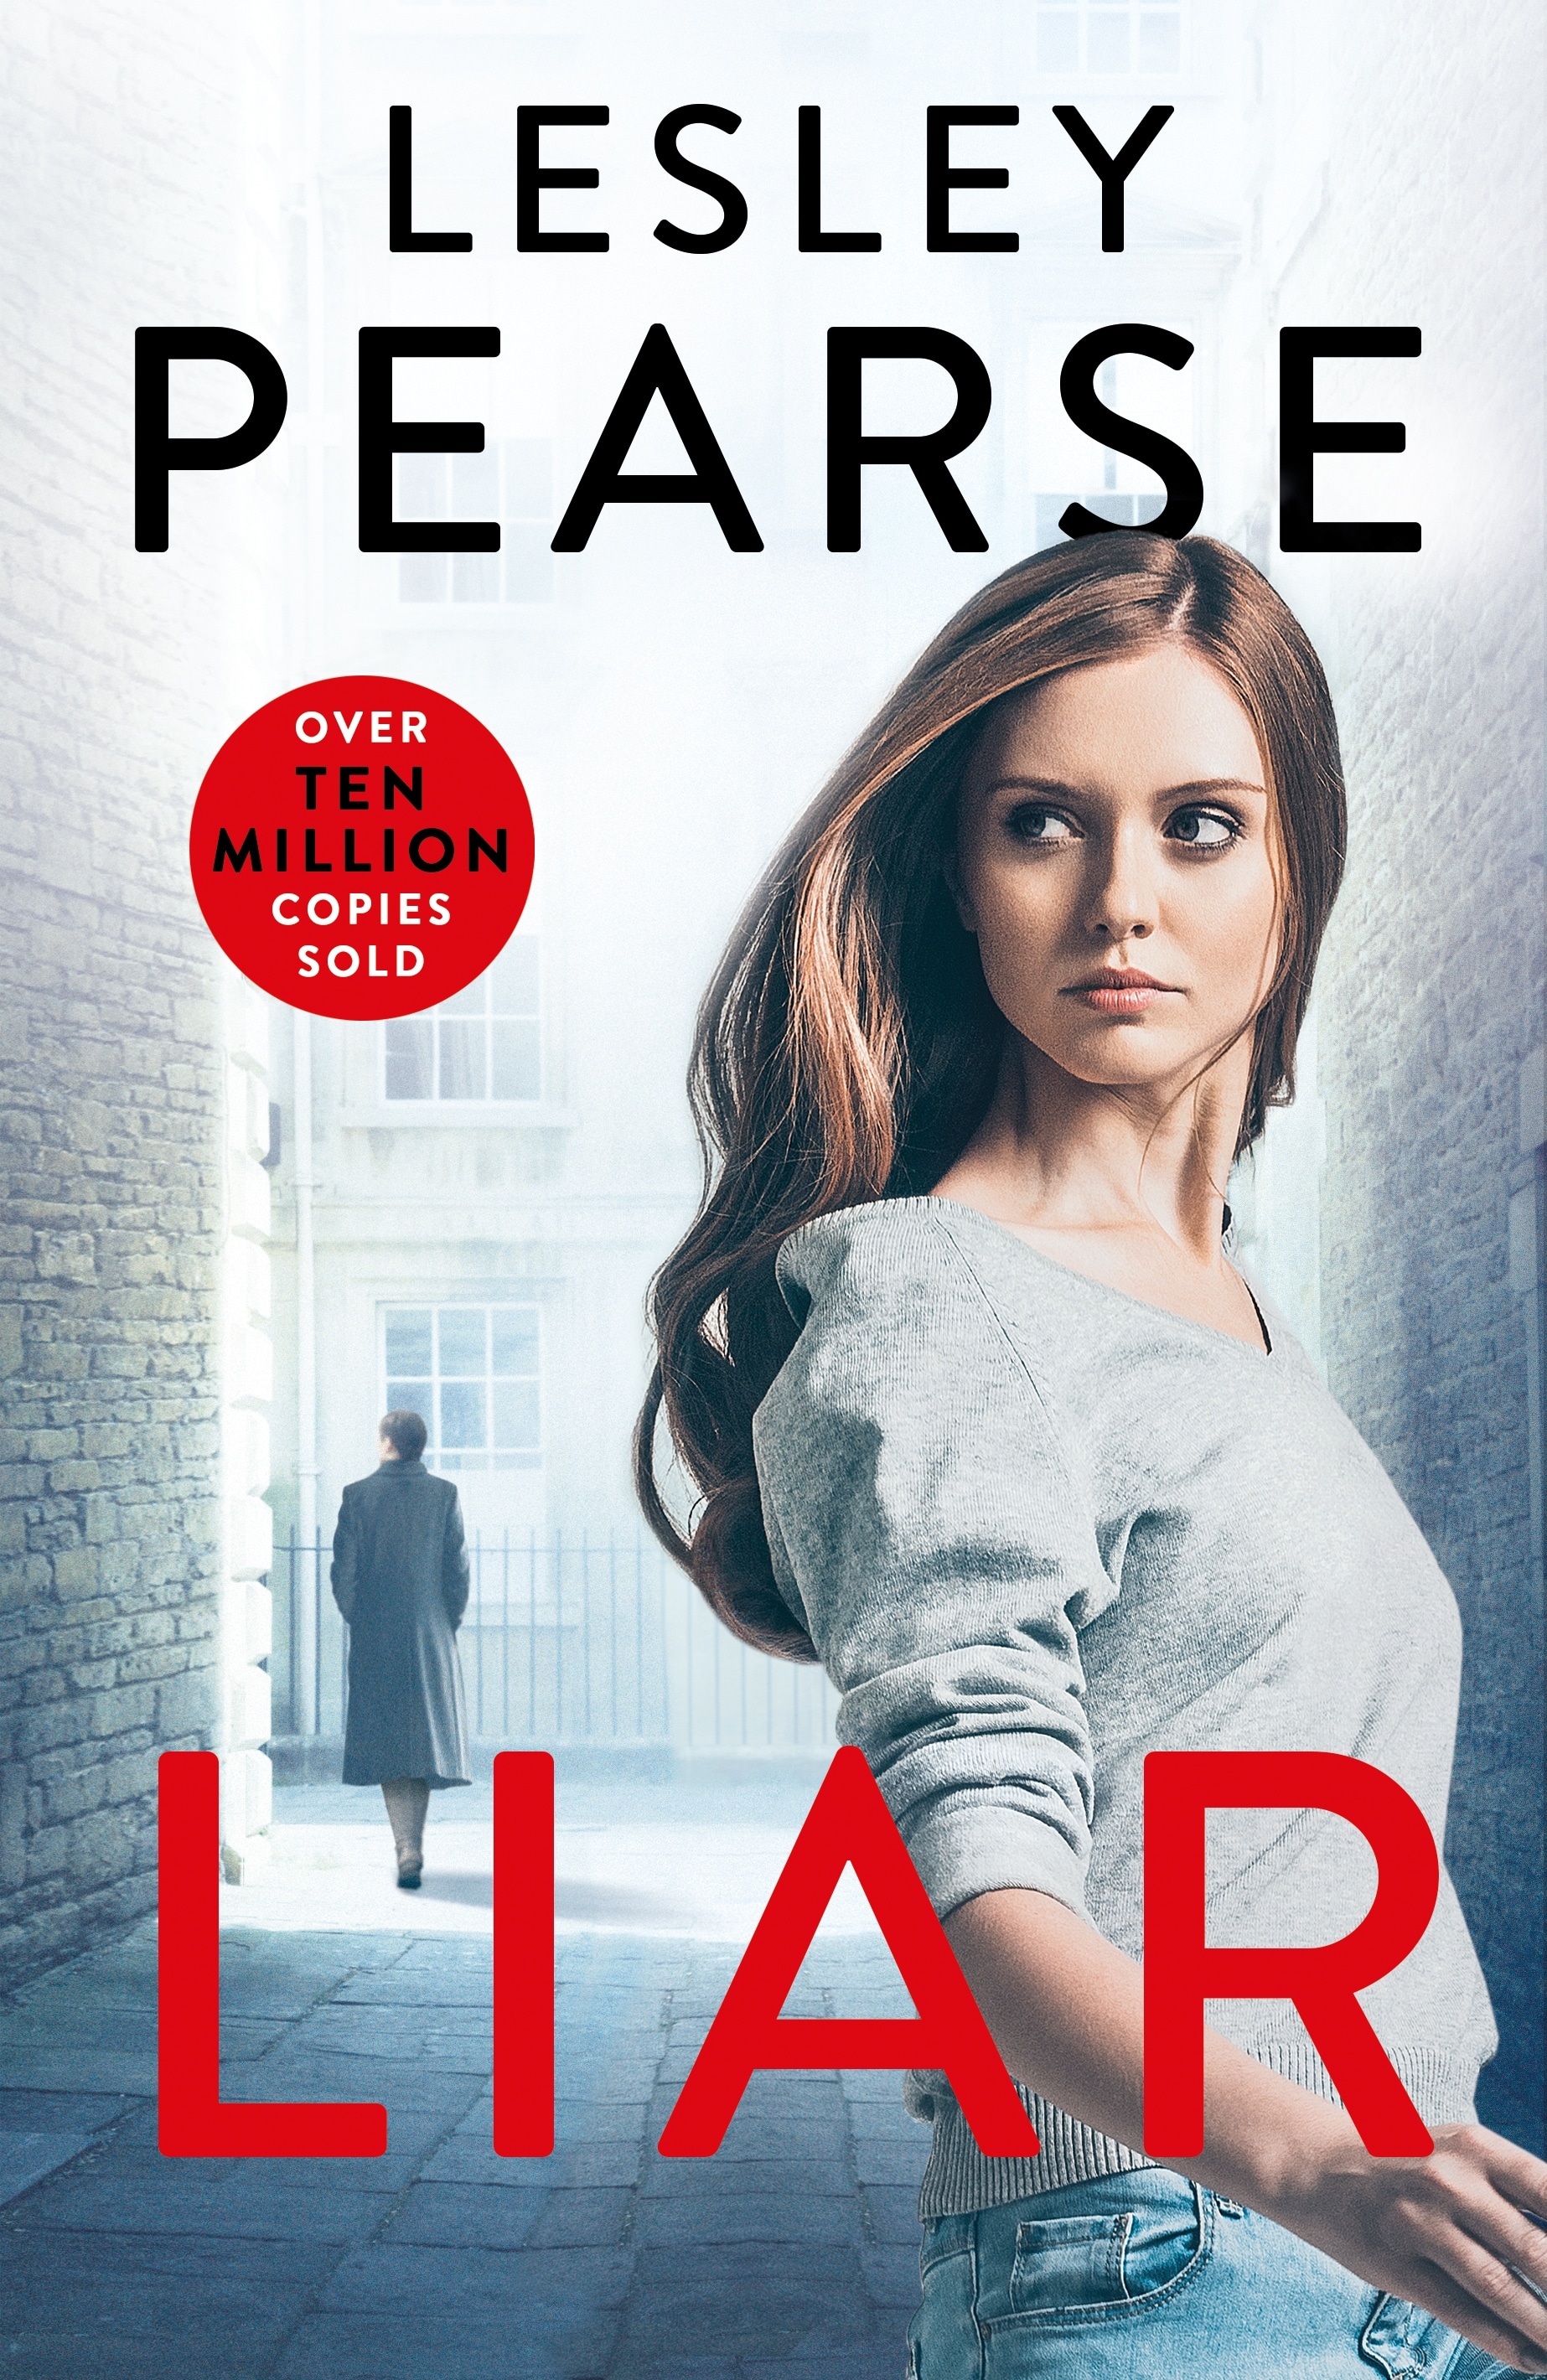 Book “Liar” by Lesley Pearse — June 25, 2020